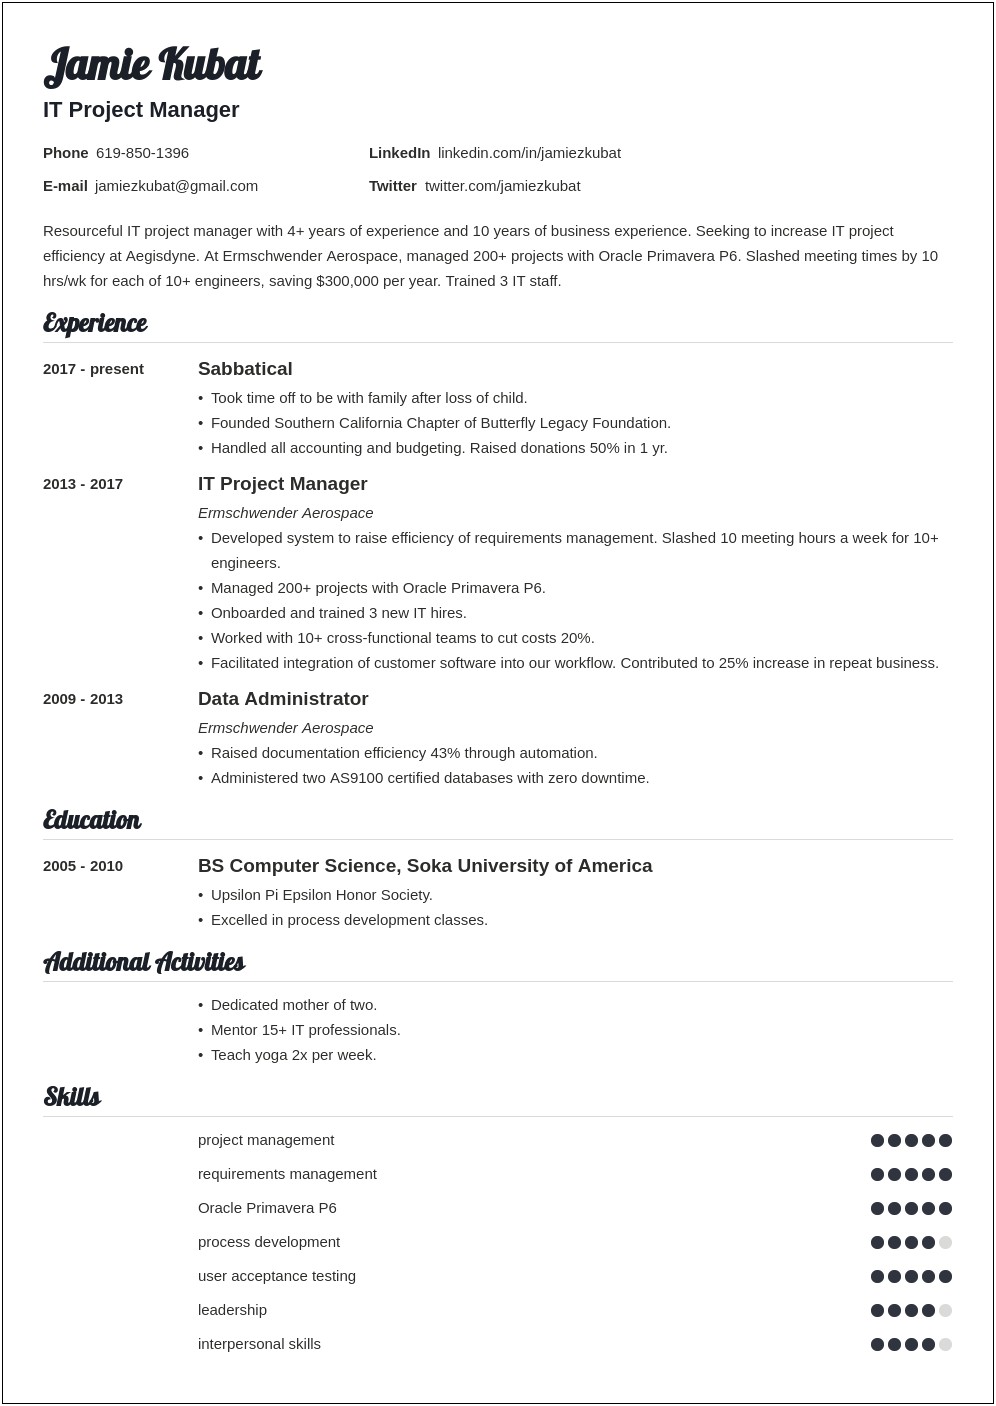 Resume For Someone With A Variety Of Jobs